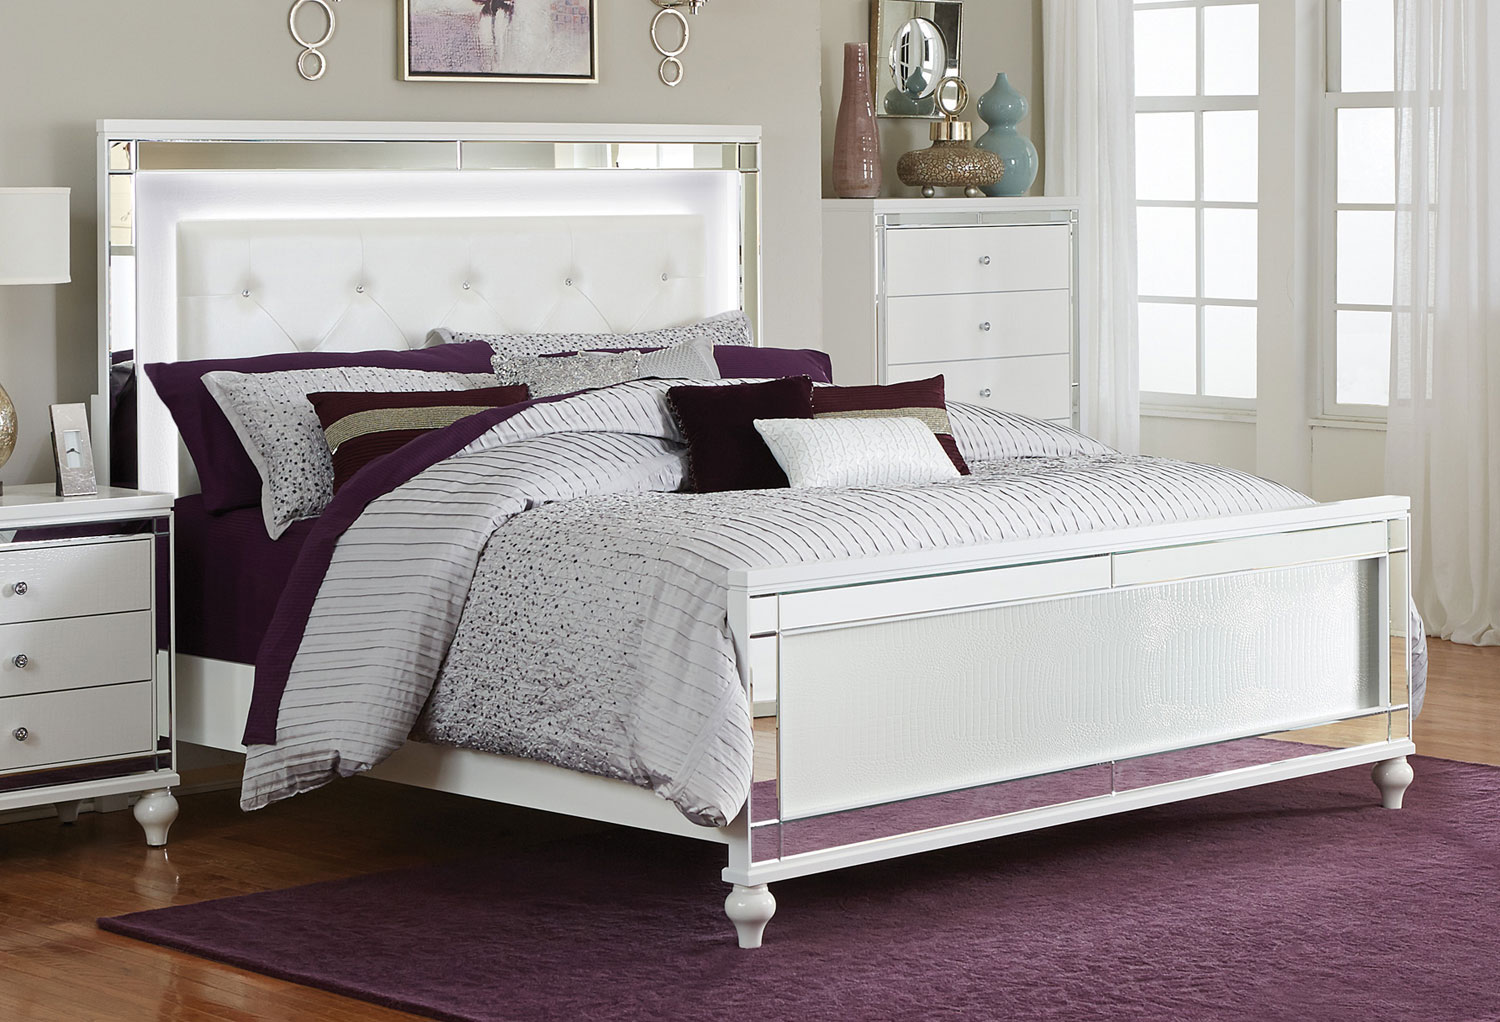 Homelegance Alonza Bed with LED Lighting - Brilliant White